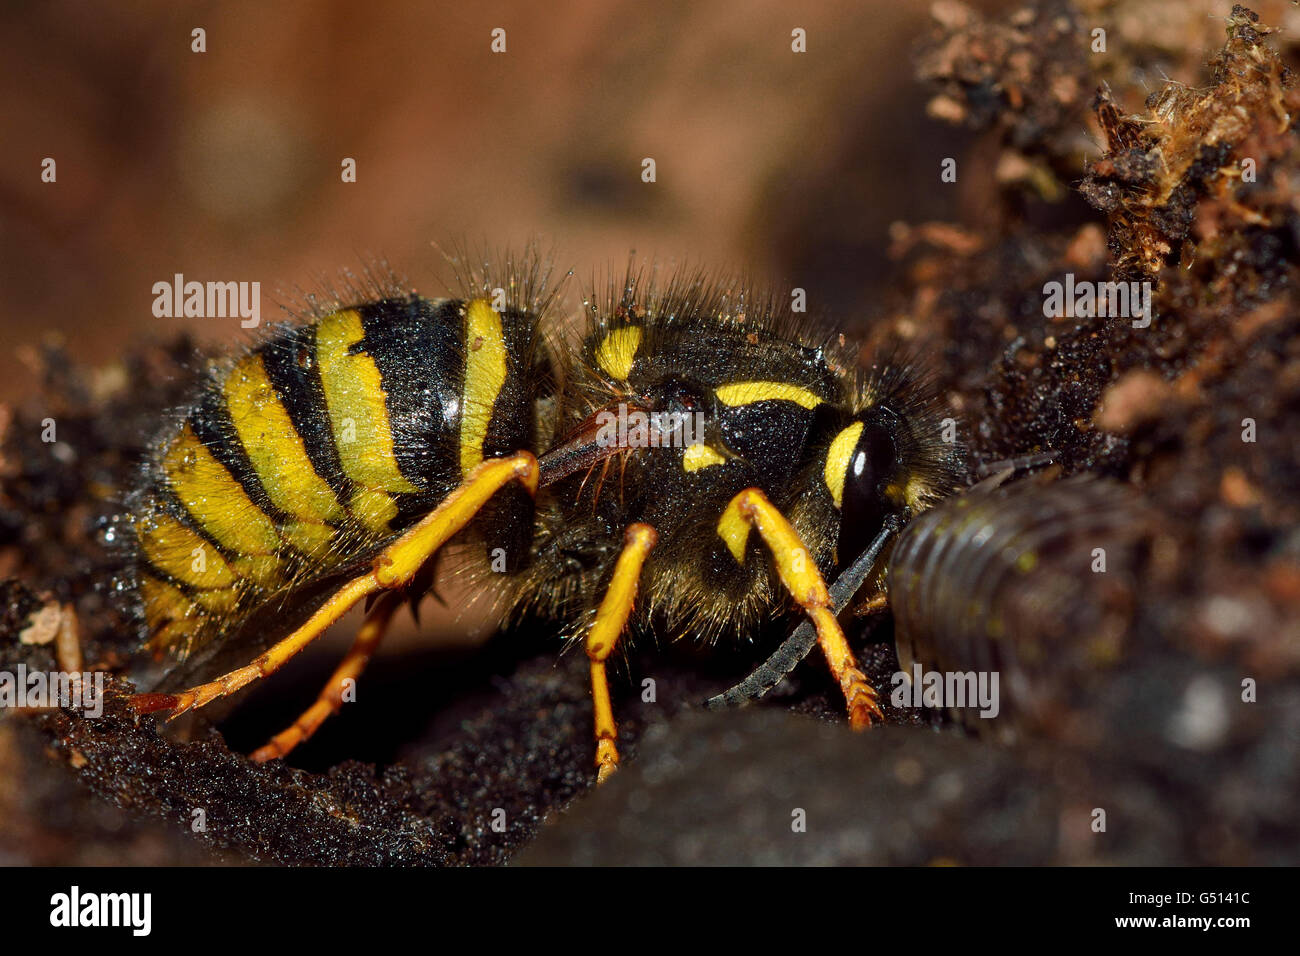 Tree wasp (Dolichovespula sylvestris) queen. A wasp in the family Vespidae, showing identifying pattern on thorax and abdomen Stock Photo